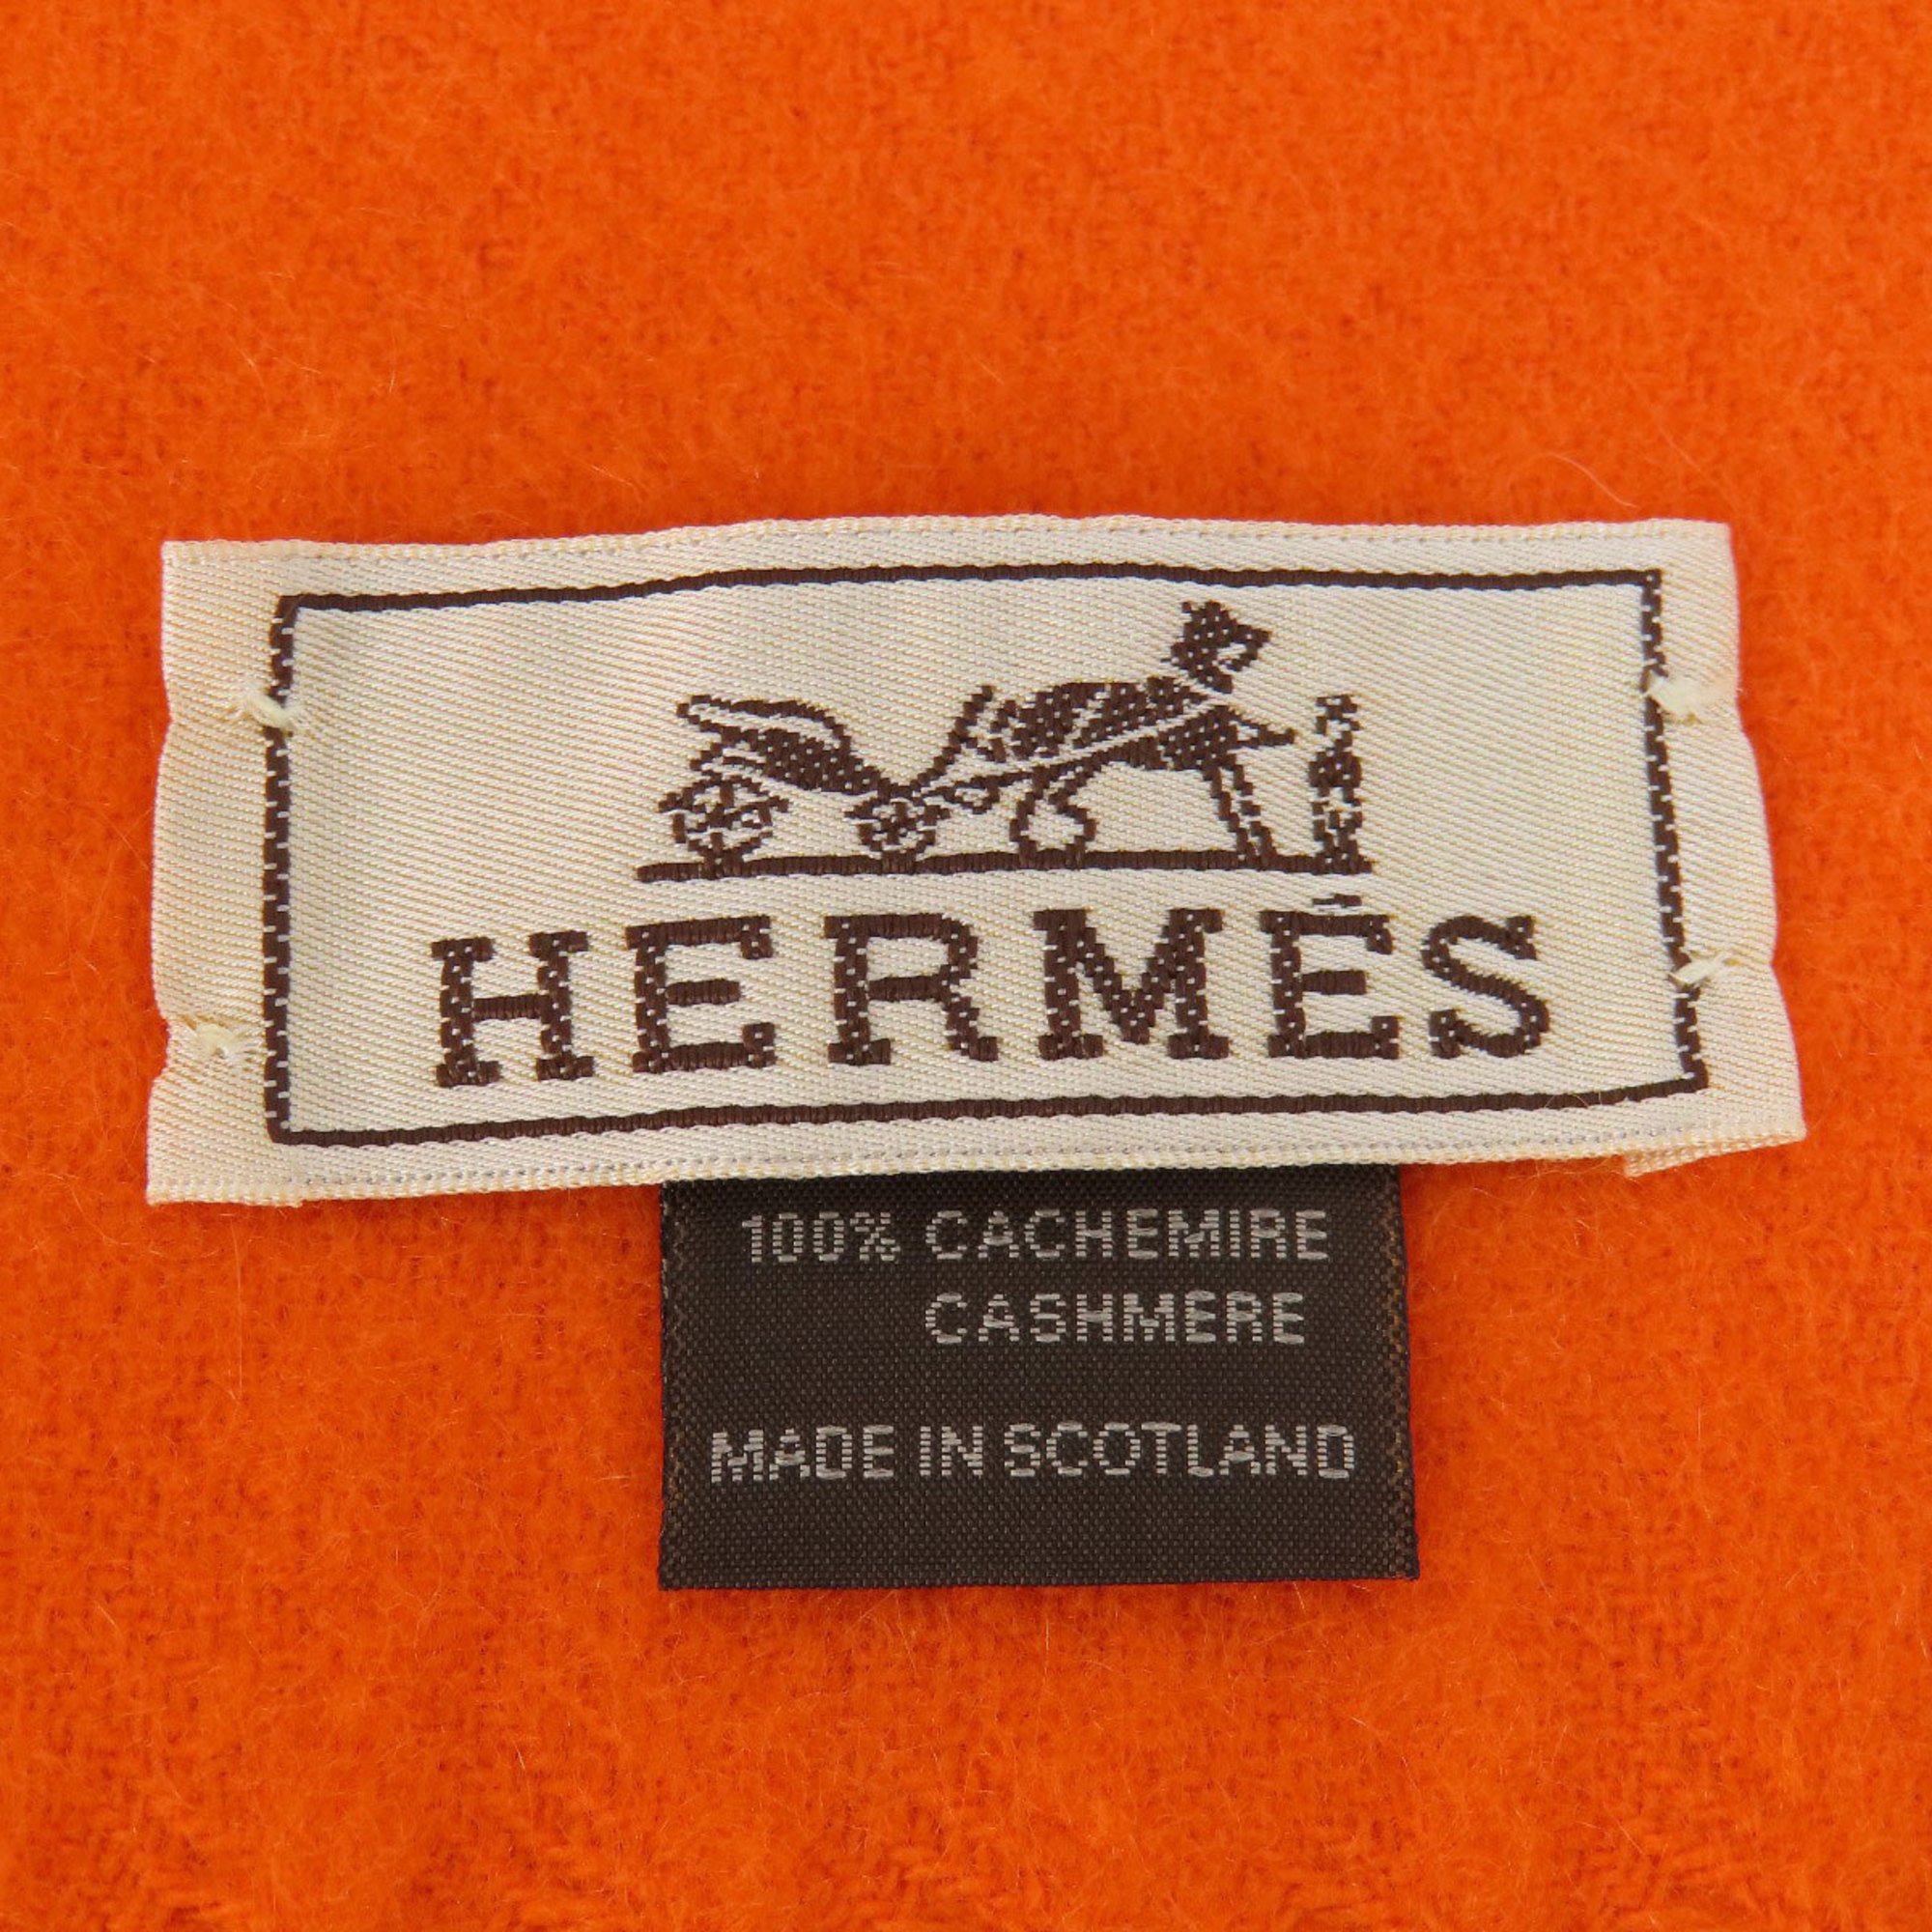 Hermes cashmere scarf for women